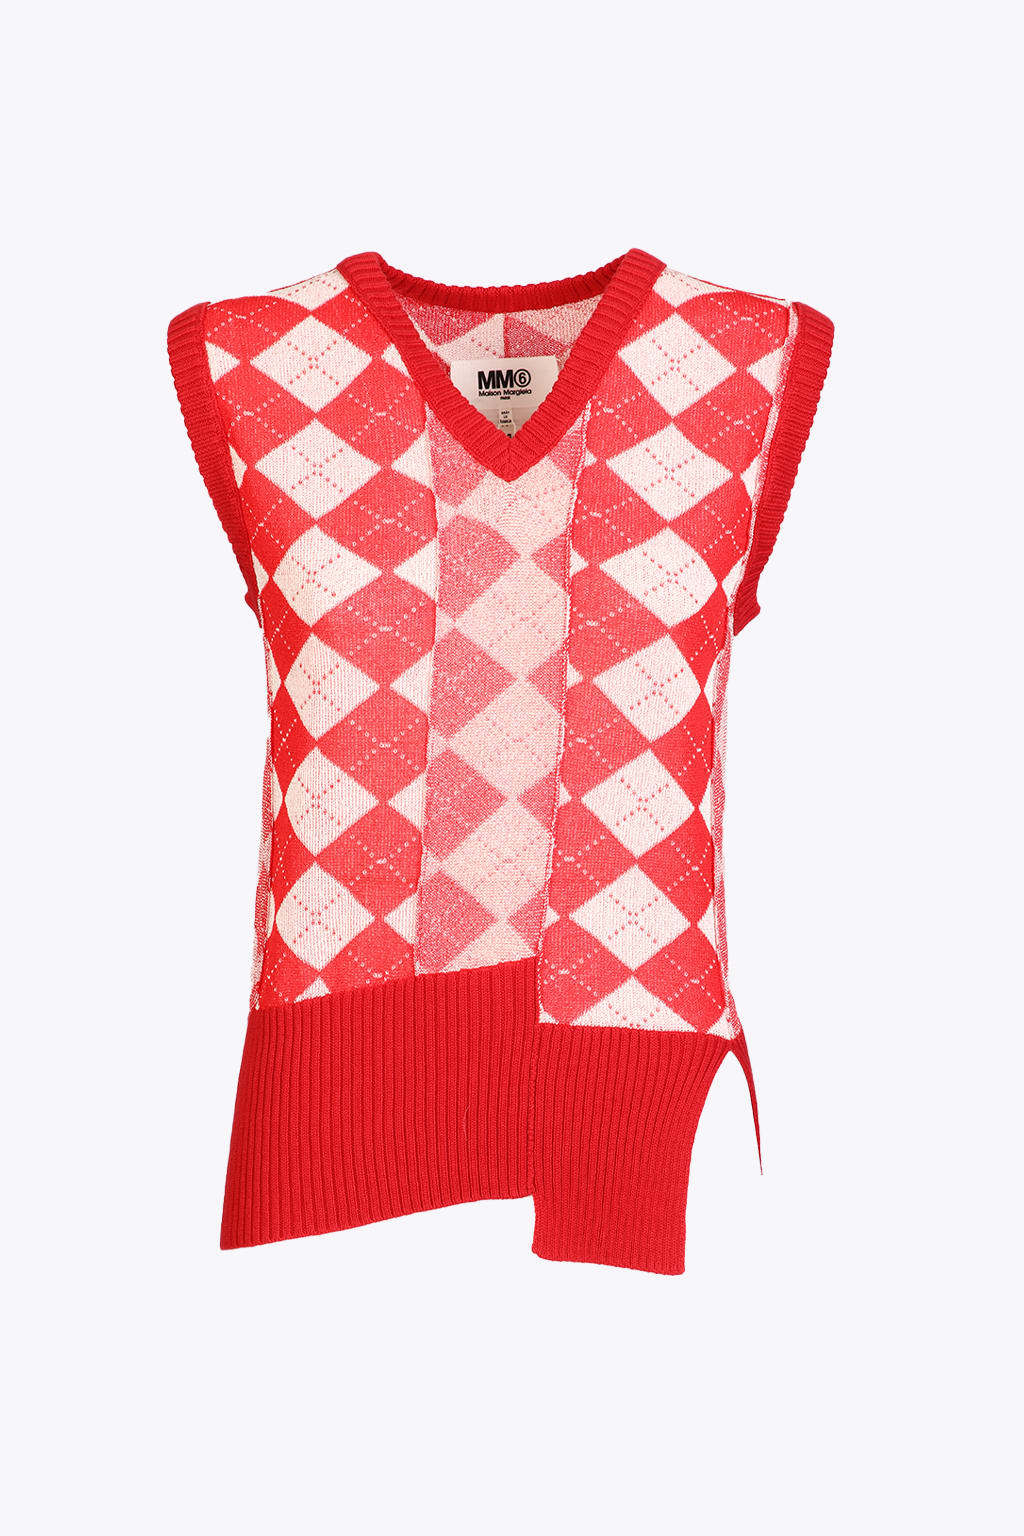 MM6 MAISON MARGIELA PULLOVER RED CHECKED KNITTED VEST